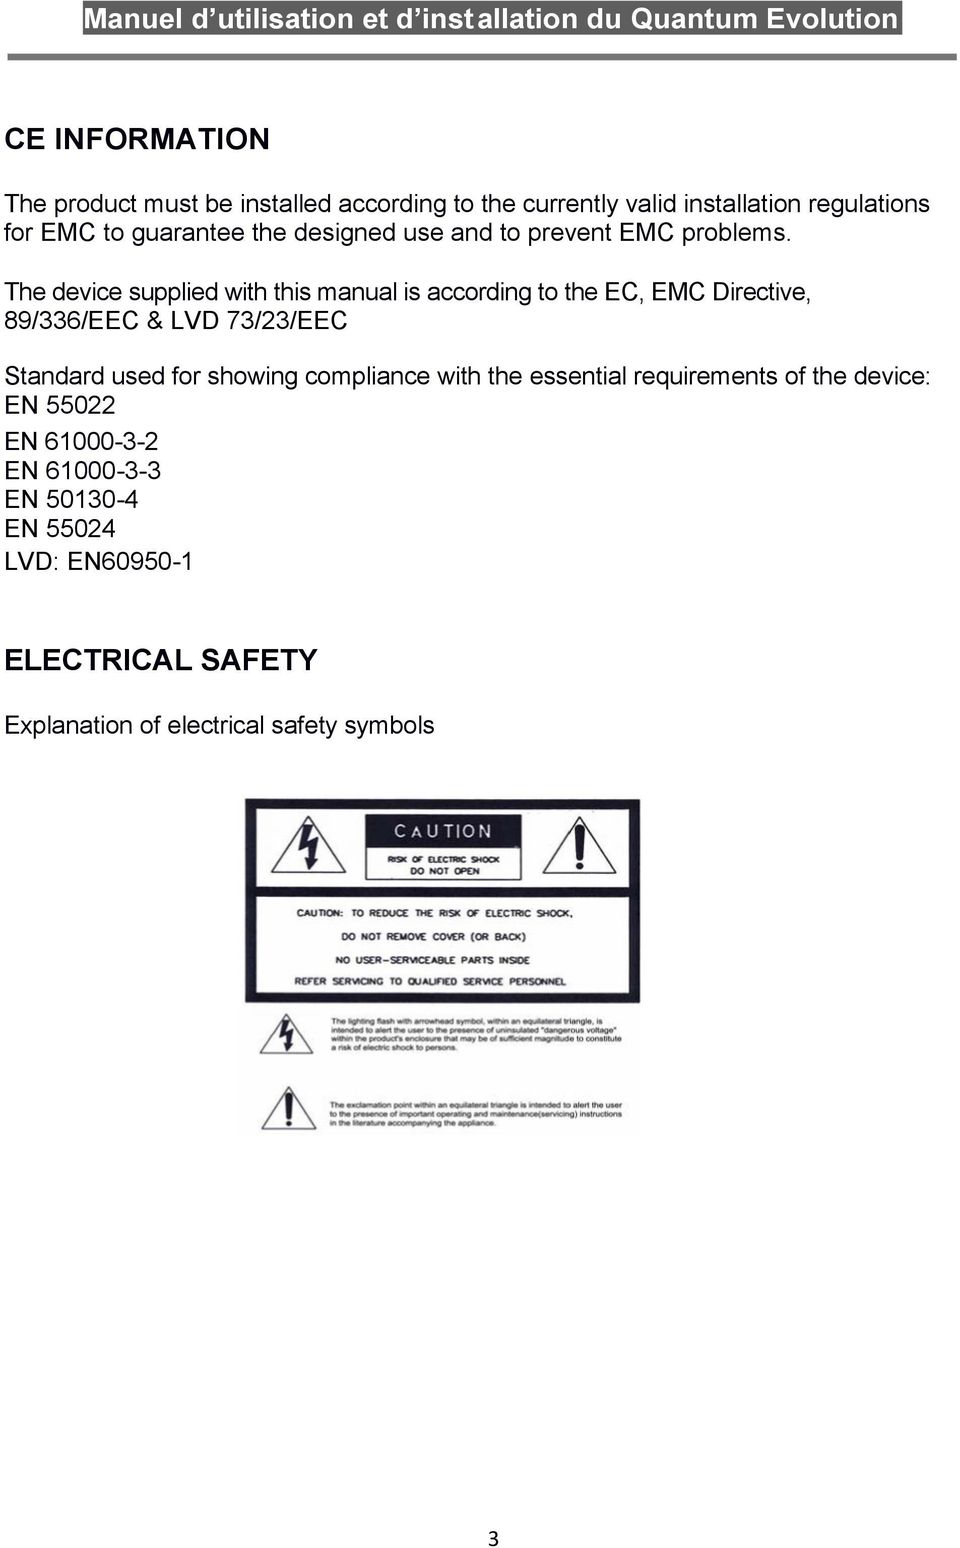 The device supplied with this manual is according to the EC, EMC Directive, 89/336/EEC & LVD 73/23/EEC Standard used for